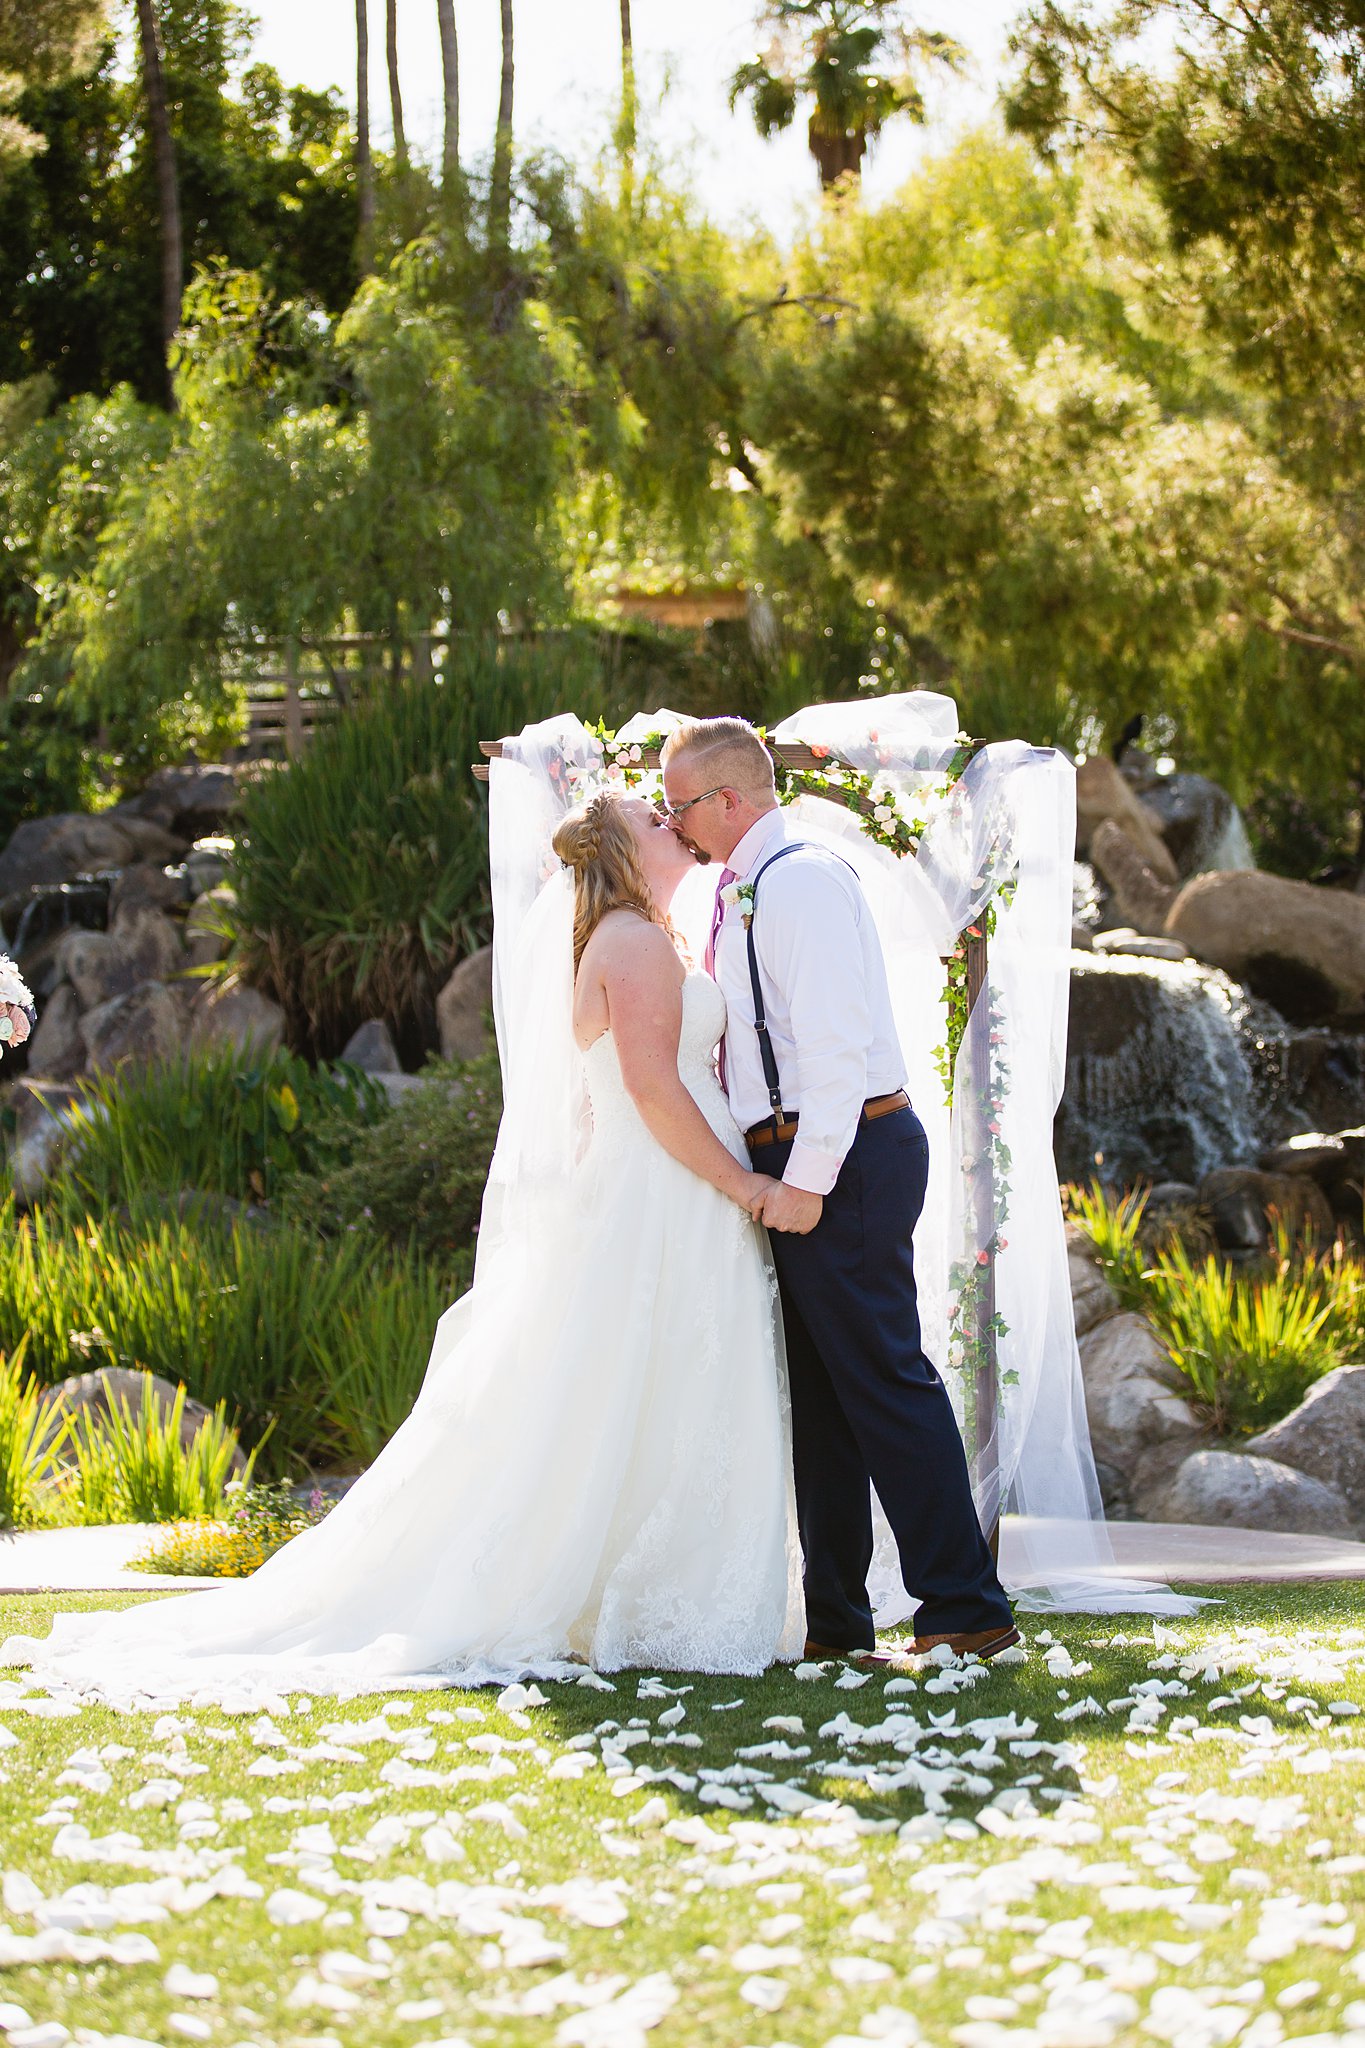 Bride and groom share their first kiss during their wedding ceremony at Val Vista Lakes by Arizona wedding photographer PMA Photography.